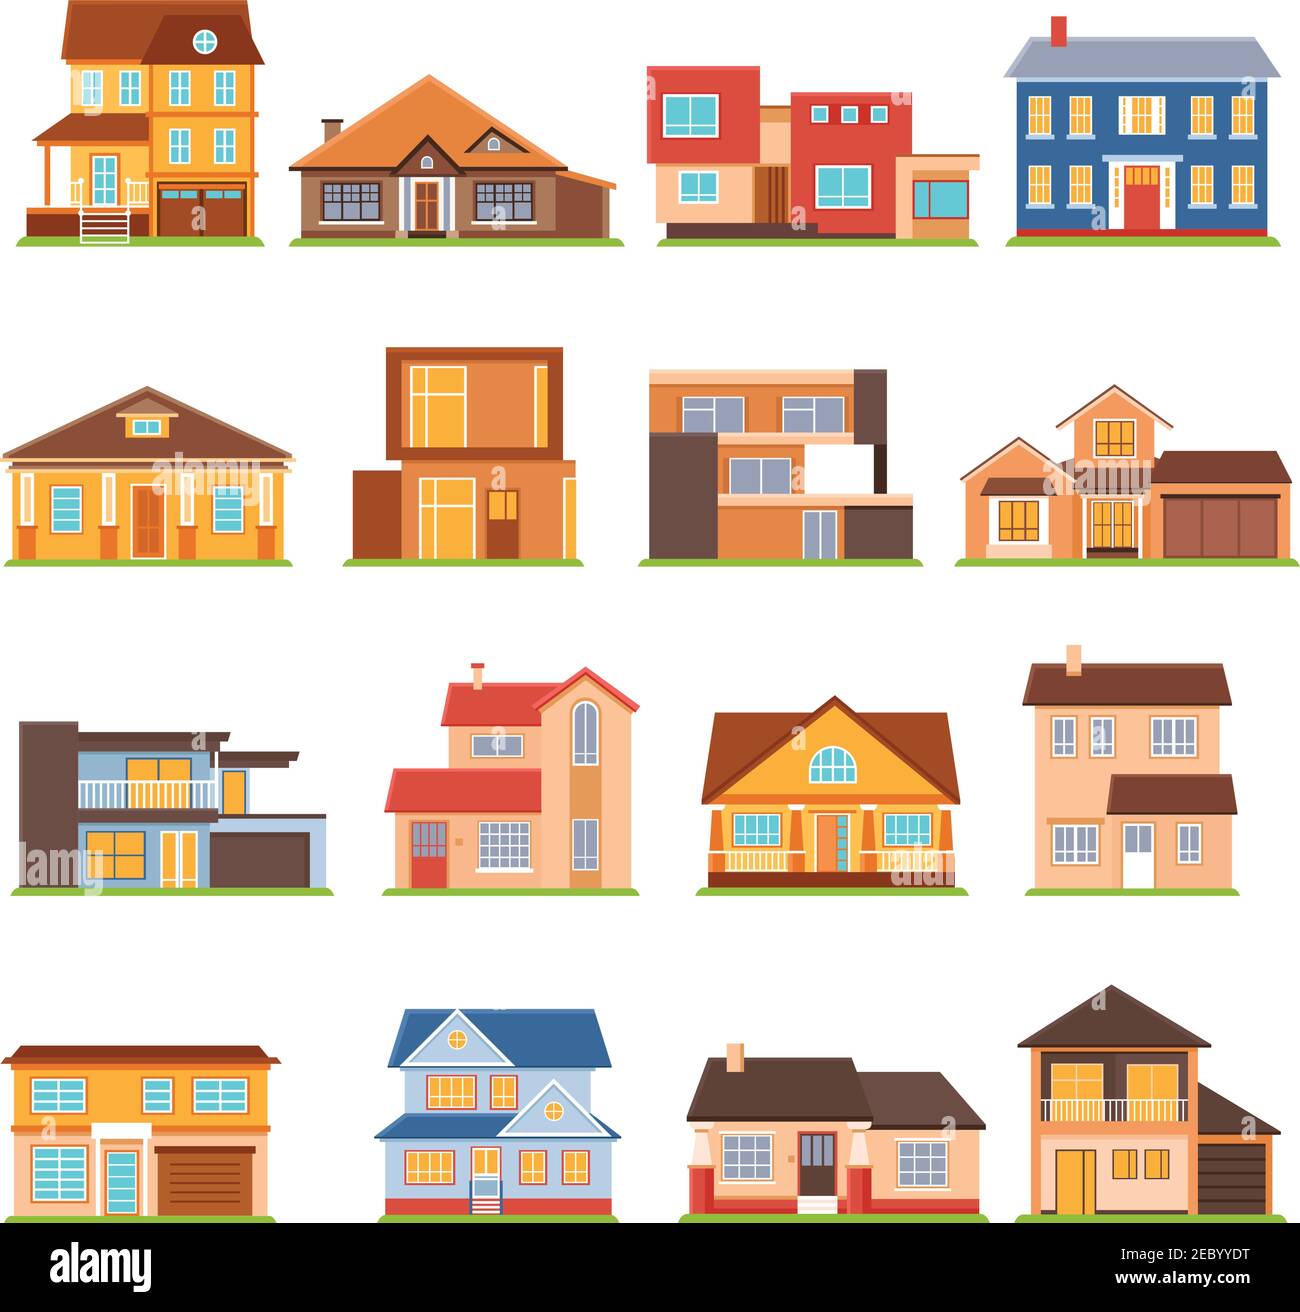 Decorative collection of modern town house cottage and estate building flat colored isolated icons vector illustration Stock Vector